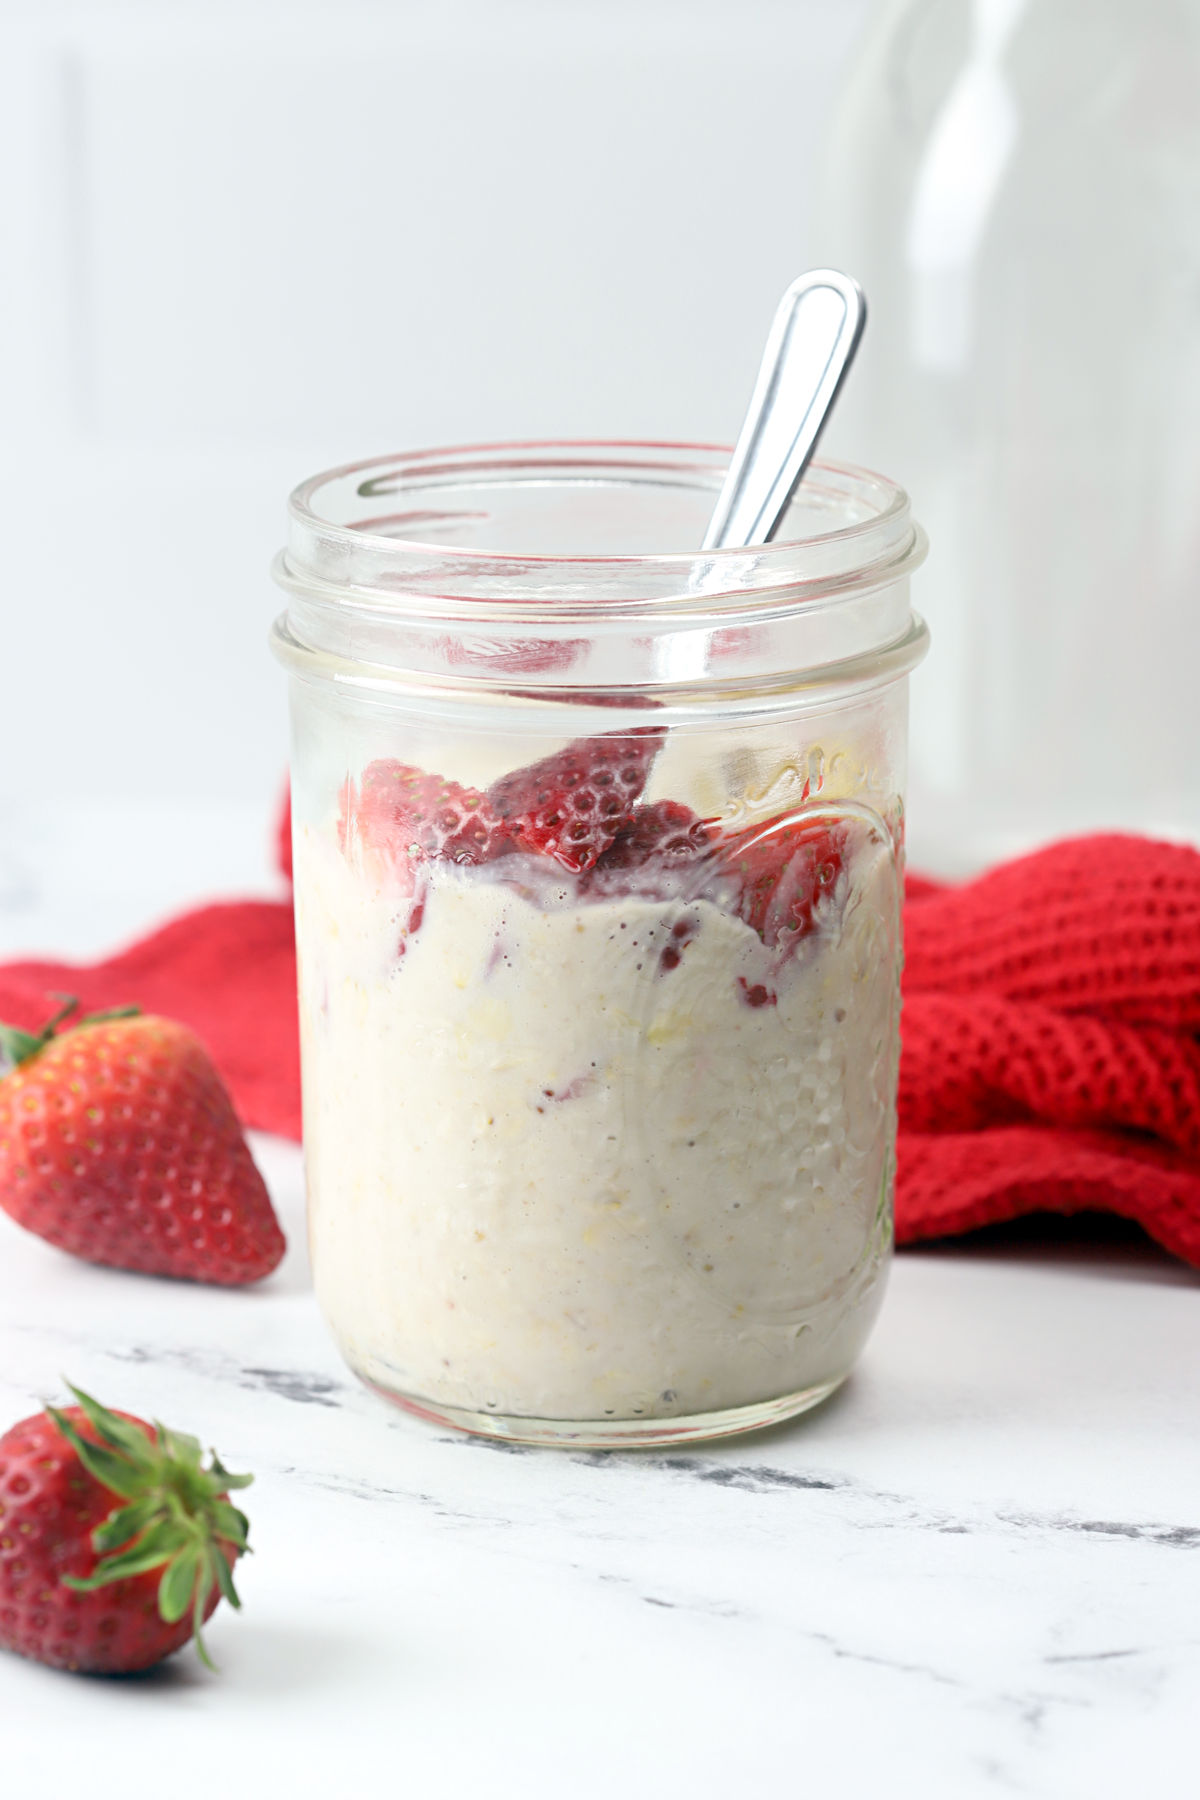 A glass jar filled with overnight oats and strawberries.